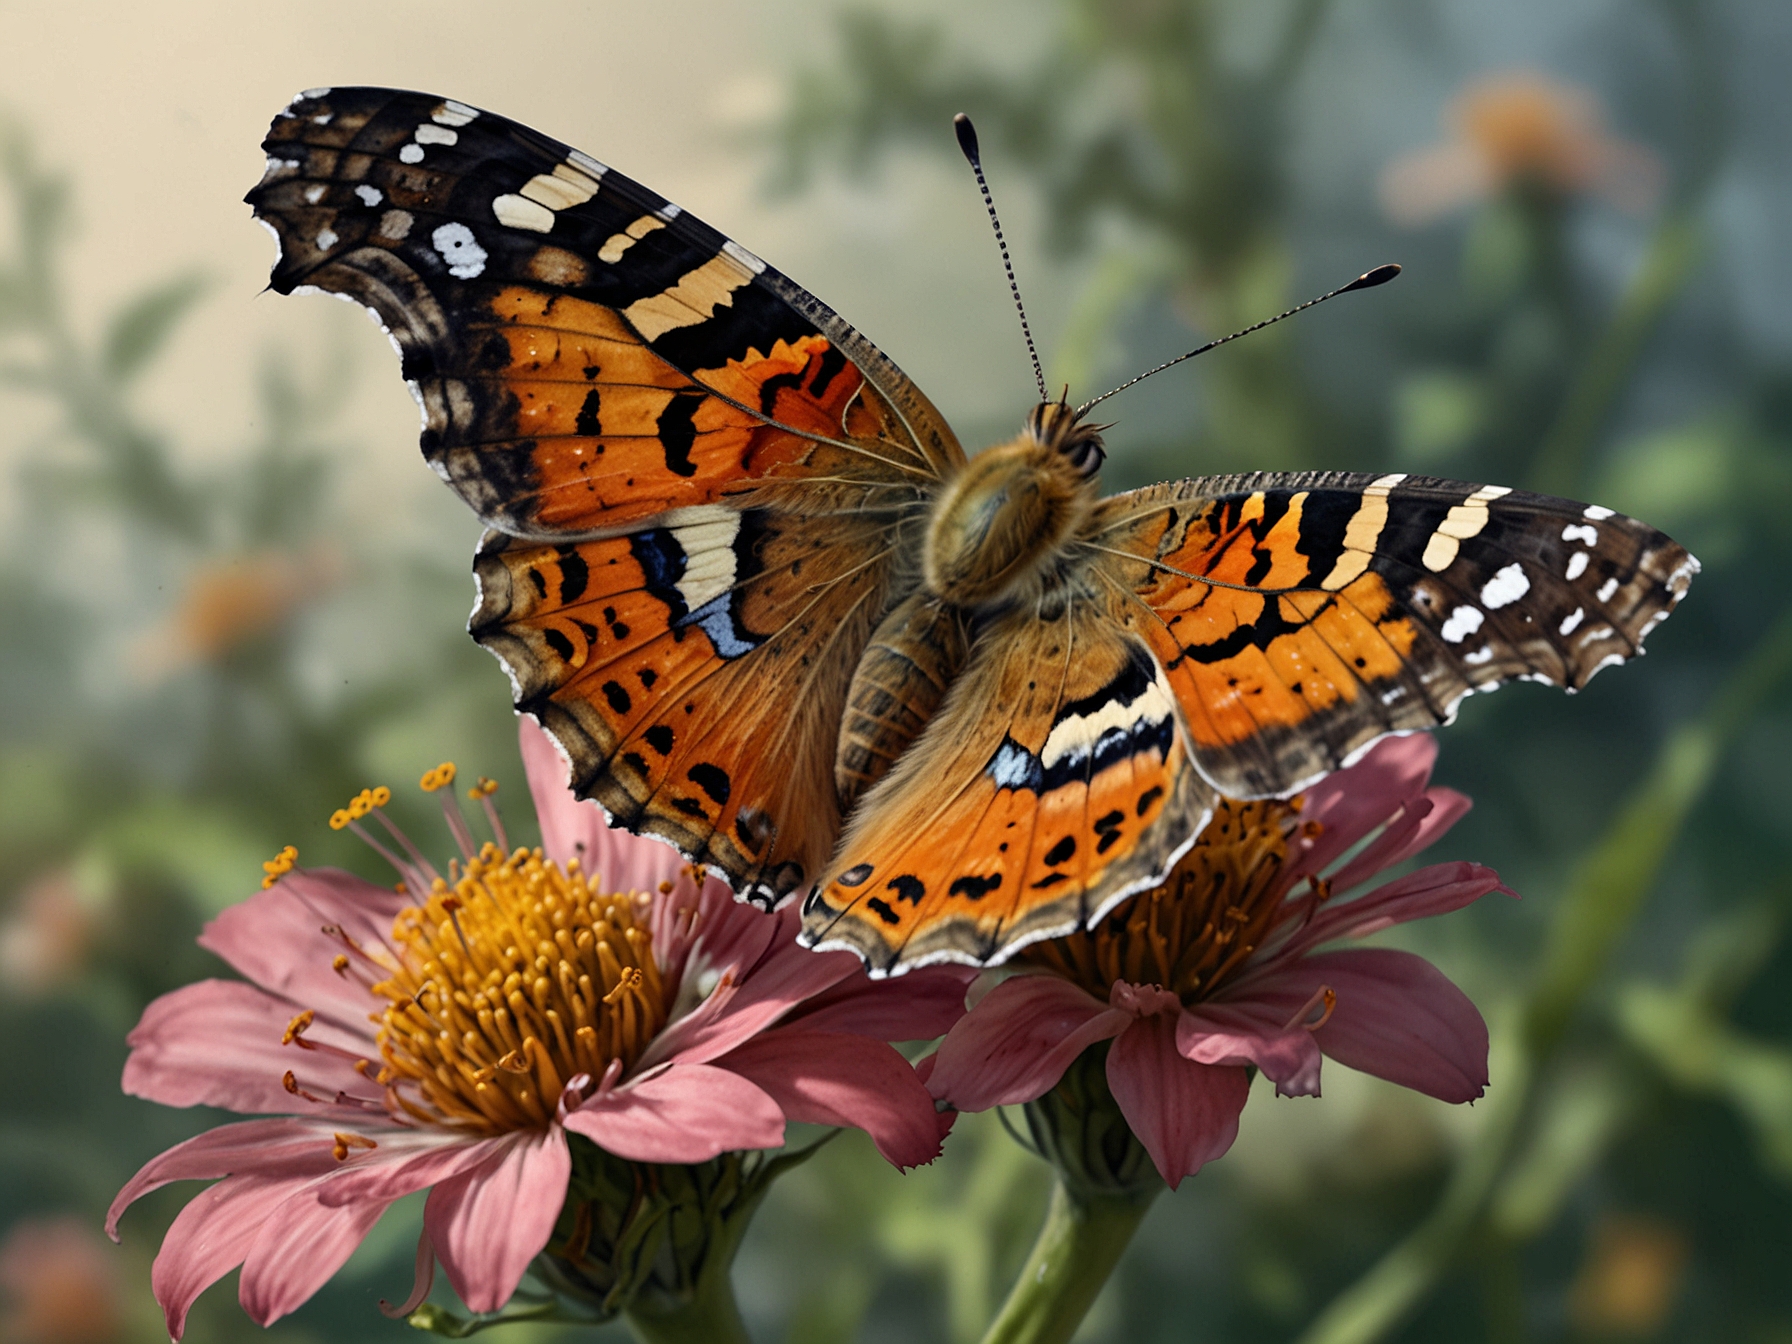 Detailed depiction of a Painted Lady butterfly feeding on nectar, highlighting the preparation and energy storage necessary for their remarkable transatlantic flight.